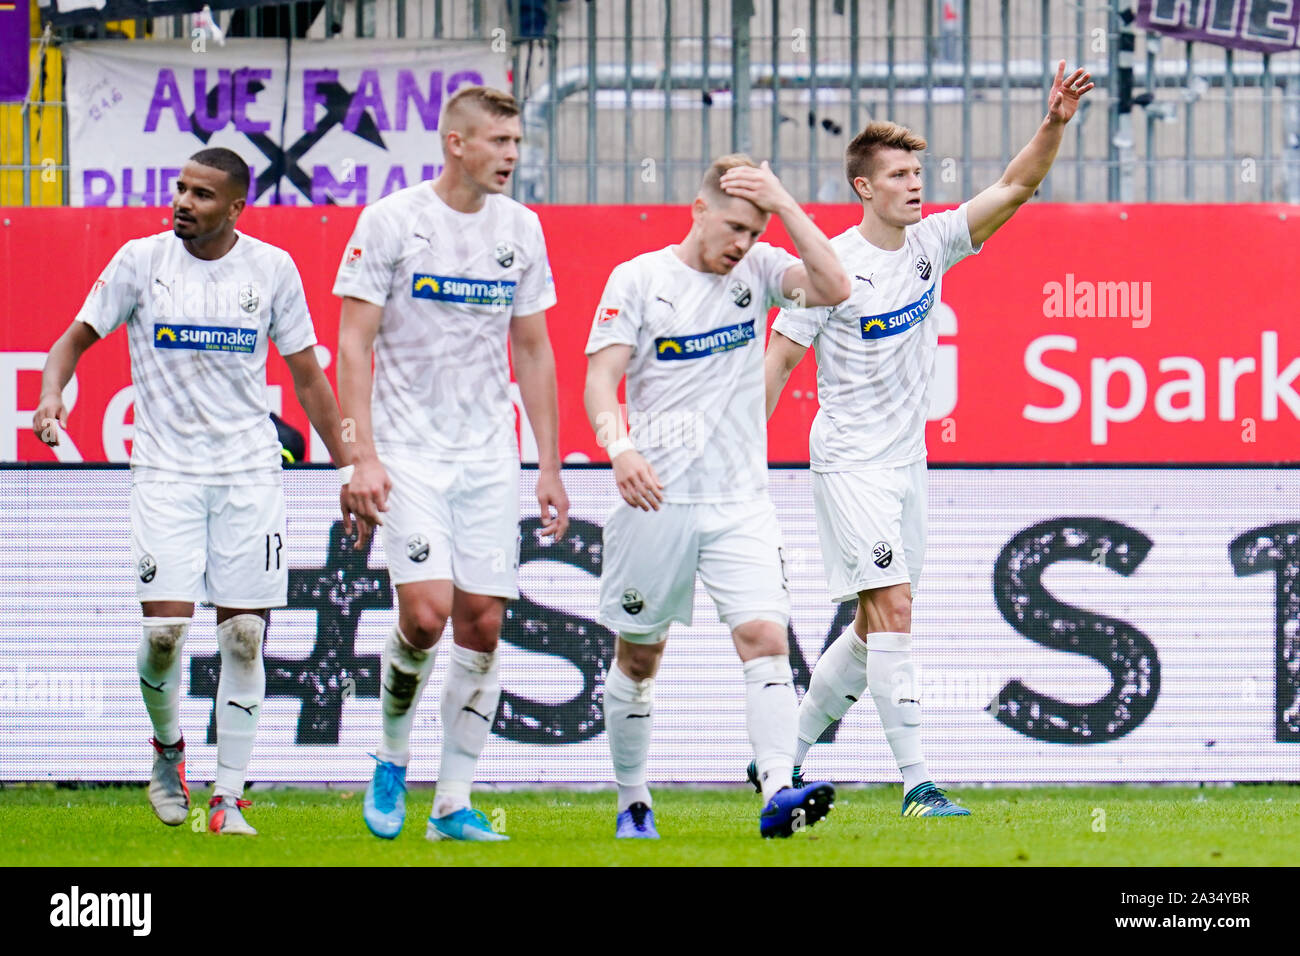 Sandhausen, Germany. 05th Oct, 2019. Soccer: 2nd Bundesliga, SV Sandhausen - Erzgebirge Aue, 9th matchday, in Hardtwaldstadion. Sandhausen's scorer Kevin Behrens (r) rejoices with his team-mates over the goal to 2-1. Credit: Uwe Anspach/dpa - IMPORTANT NOTE: In accordance with the requirements of the DFL Deutsche Fußball Liga or the DFB Deutscher Fußball-Bund, it is prohibited to use or have used photographs taken in the stadium and/or the match in the form of sequence images and/or video-like photo sequences./dpa/Alamy Live News Stock Photo